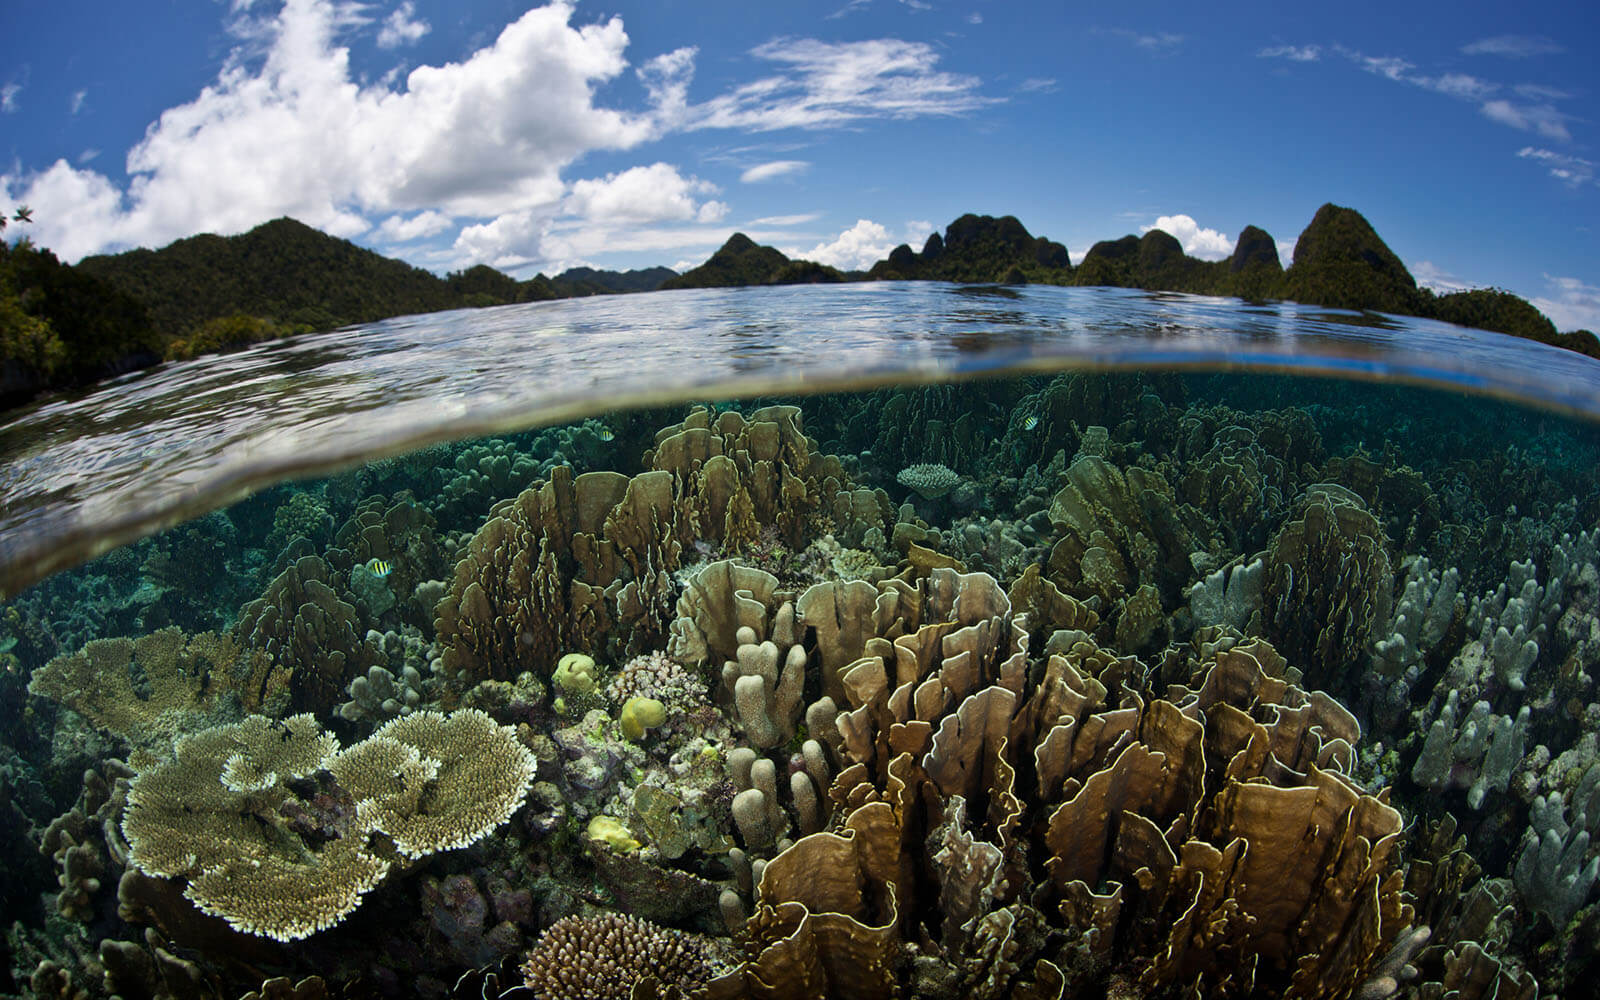 Corals grow in shallow water in West Papua, Indonesia